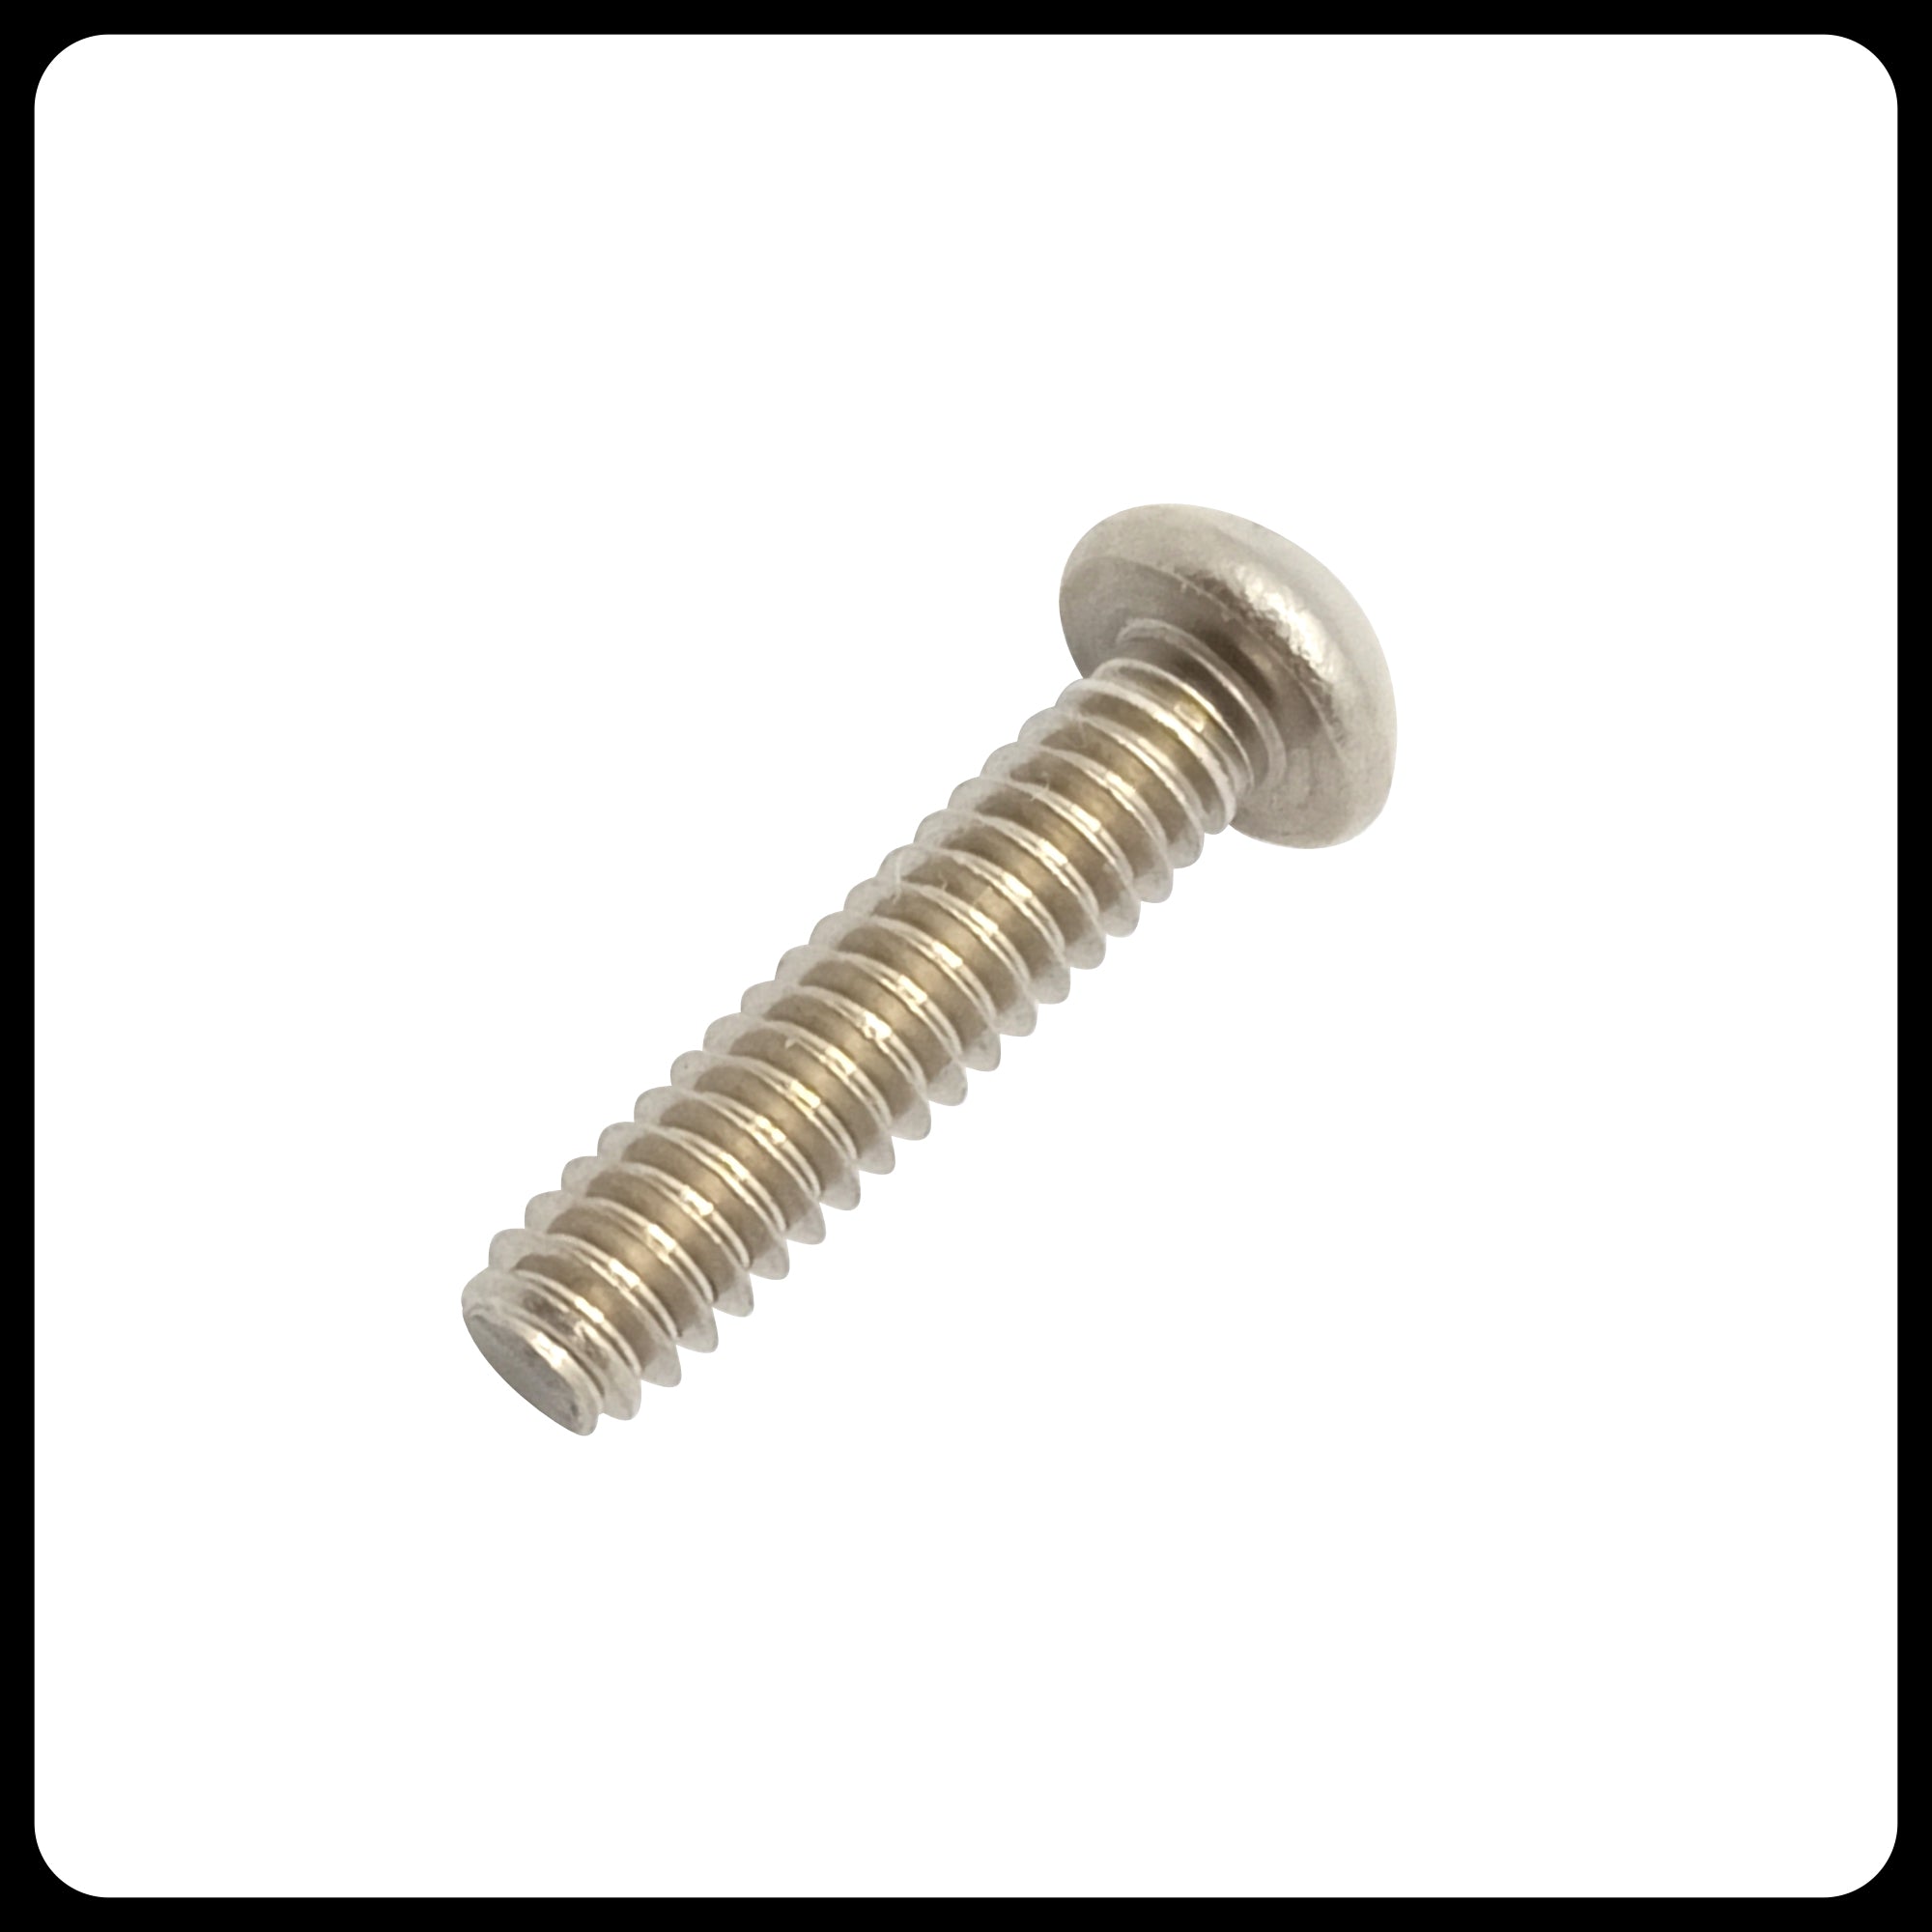 Switch Mounting Screws for Guitar Pickup Selector Switch